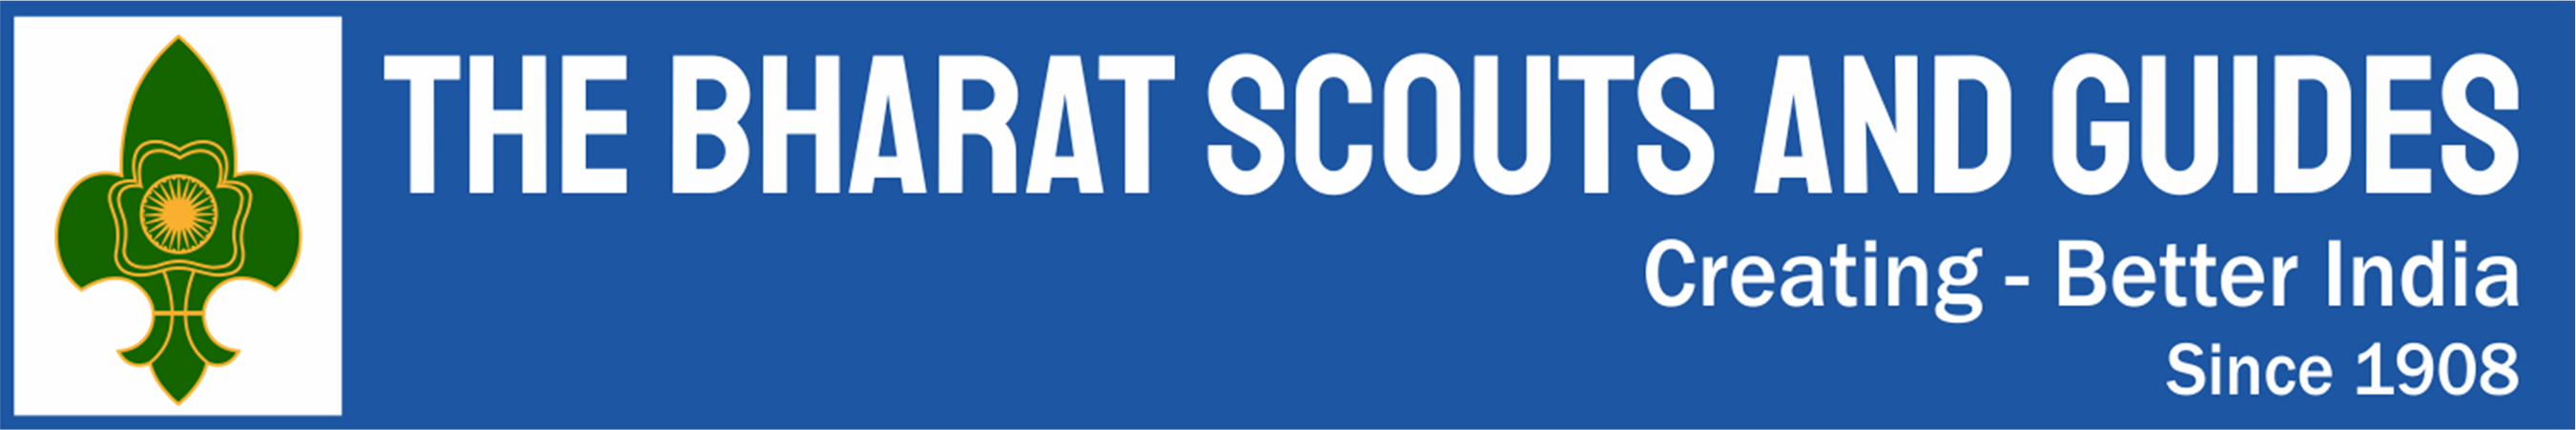 The Bharat Scouts and Guides logo